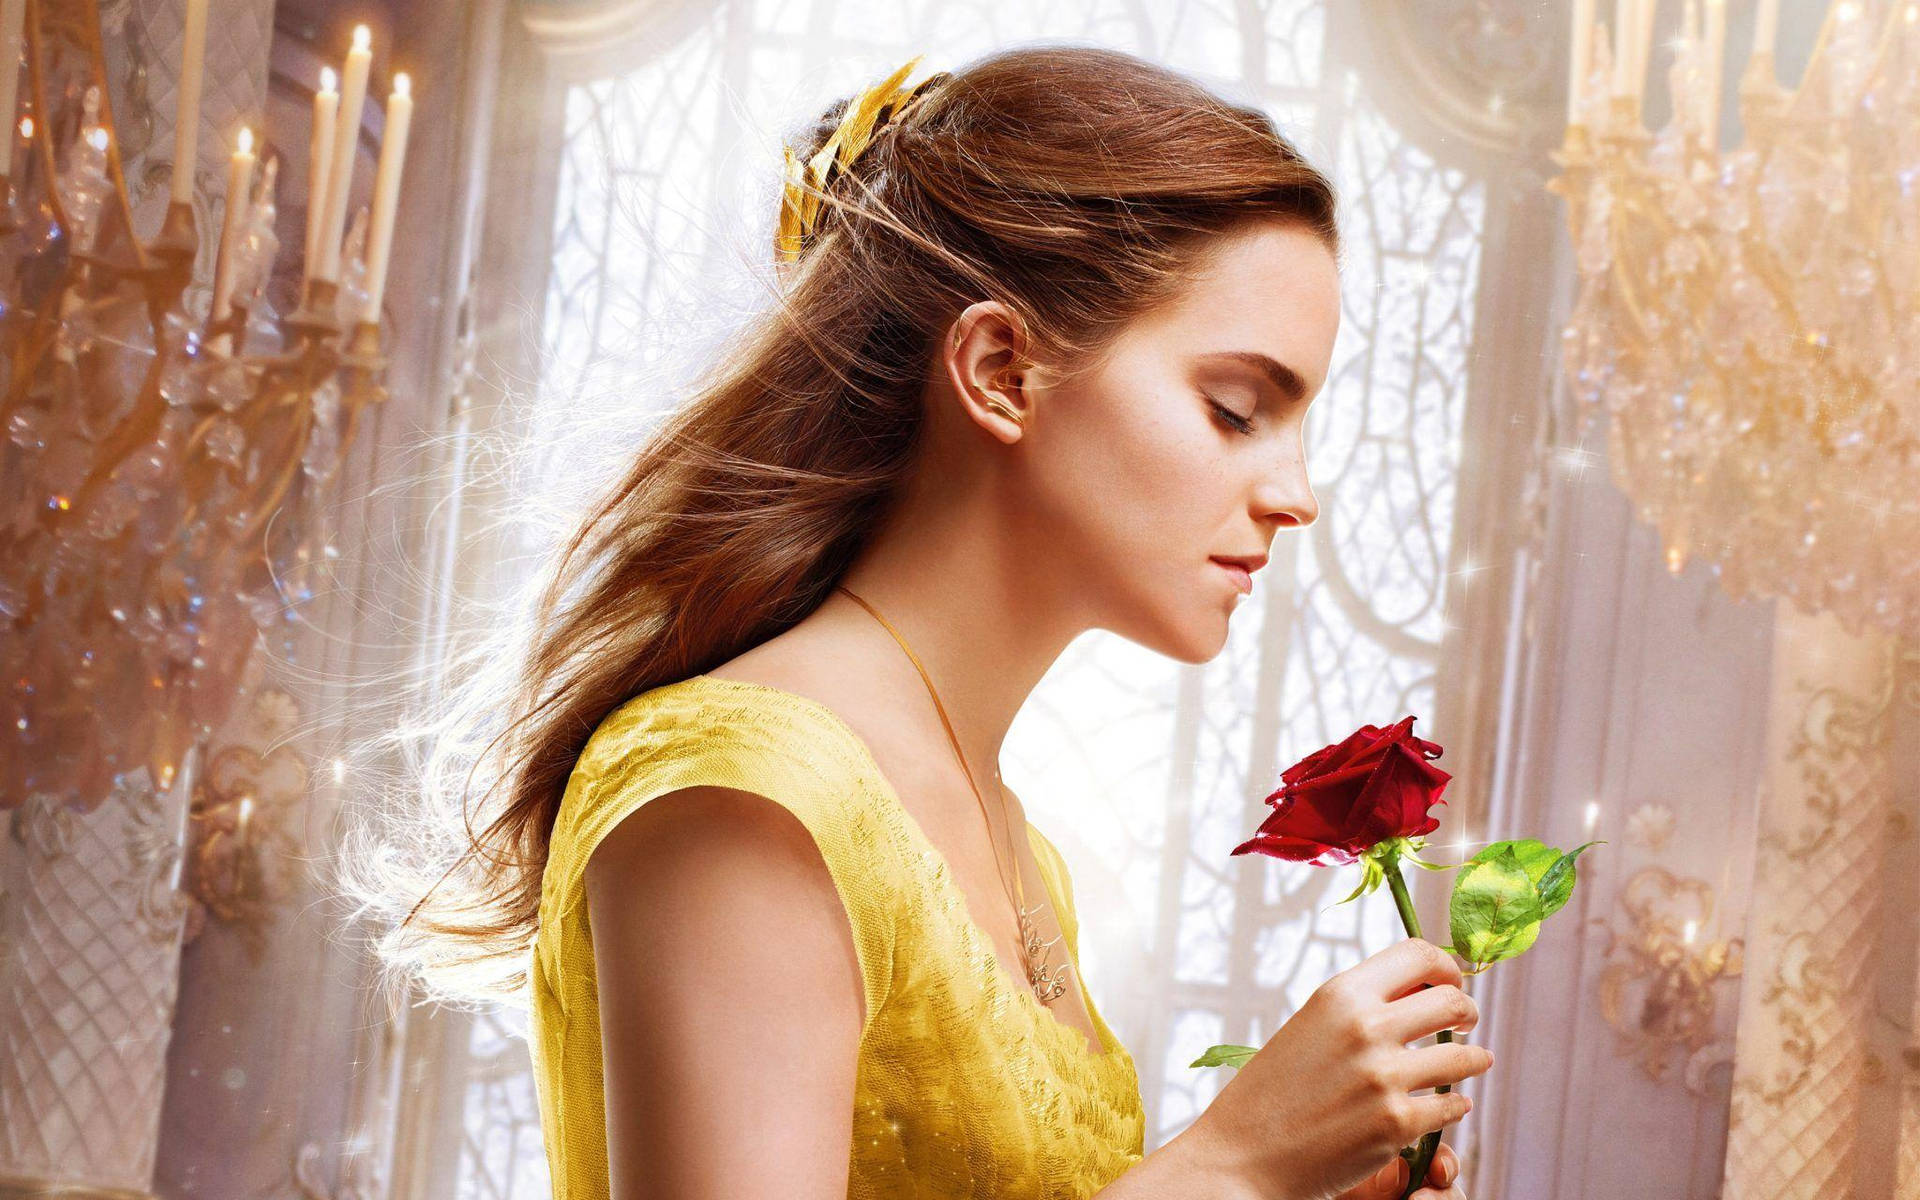 Emma Holding Beauty And The Beast Rose Wallpaper